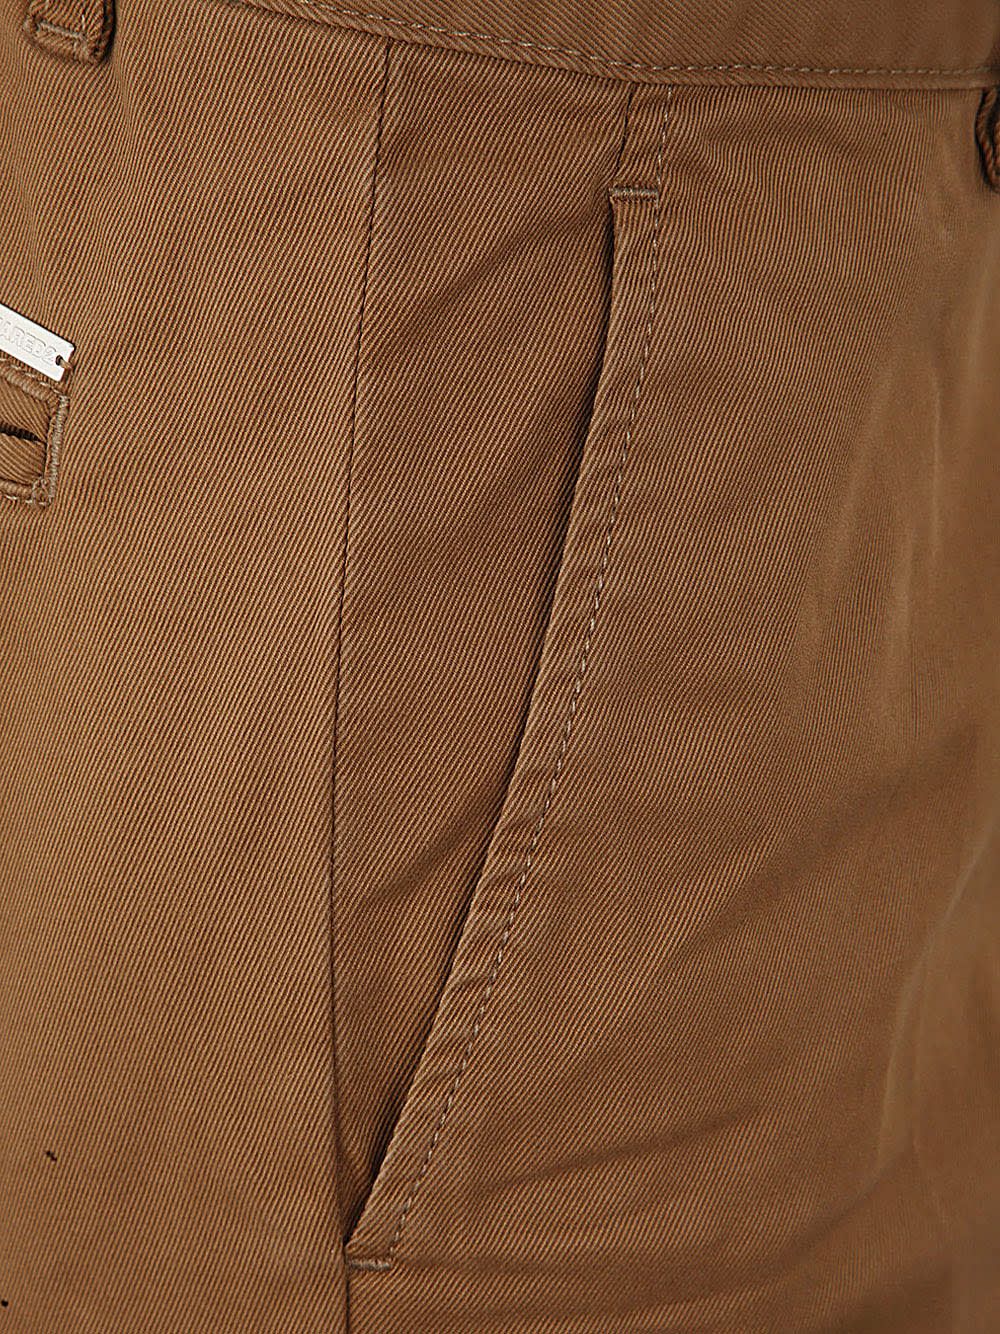 Shop Dsquared2 Sexy Chino Pant In Camel